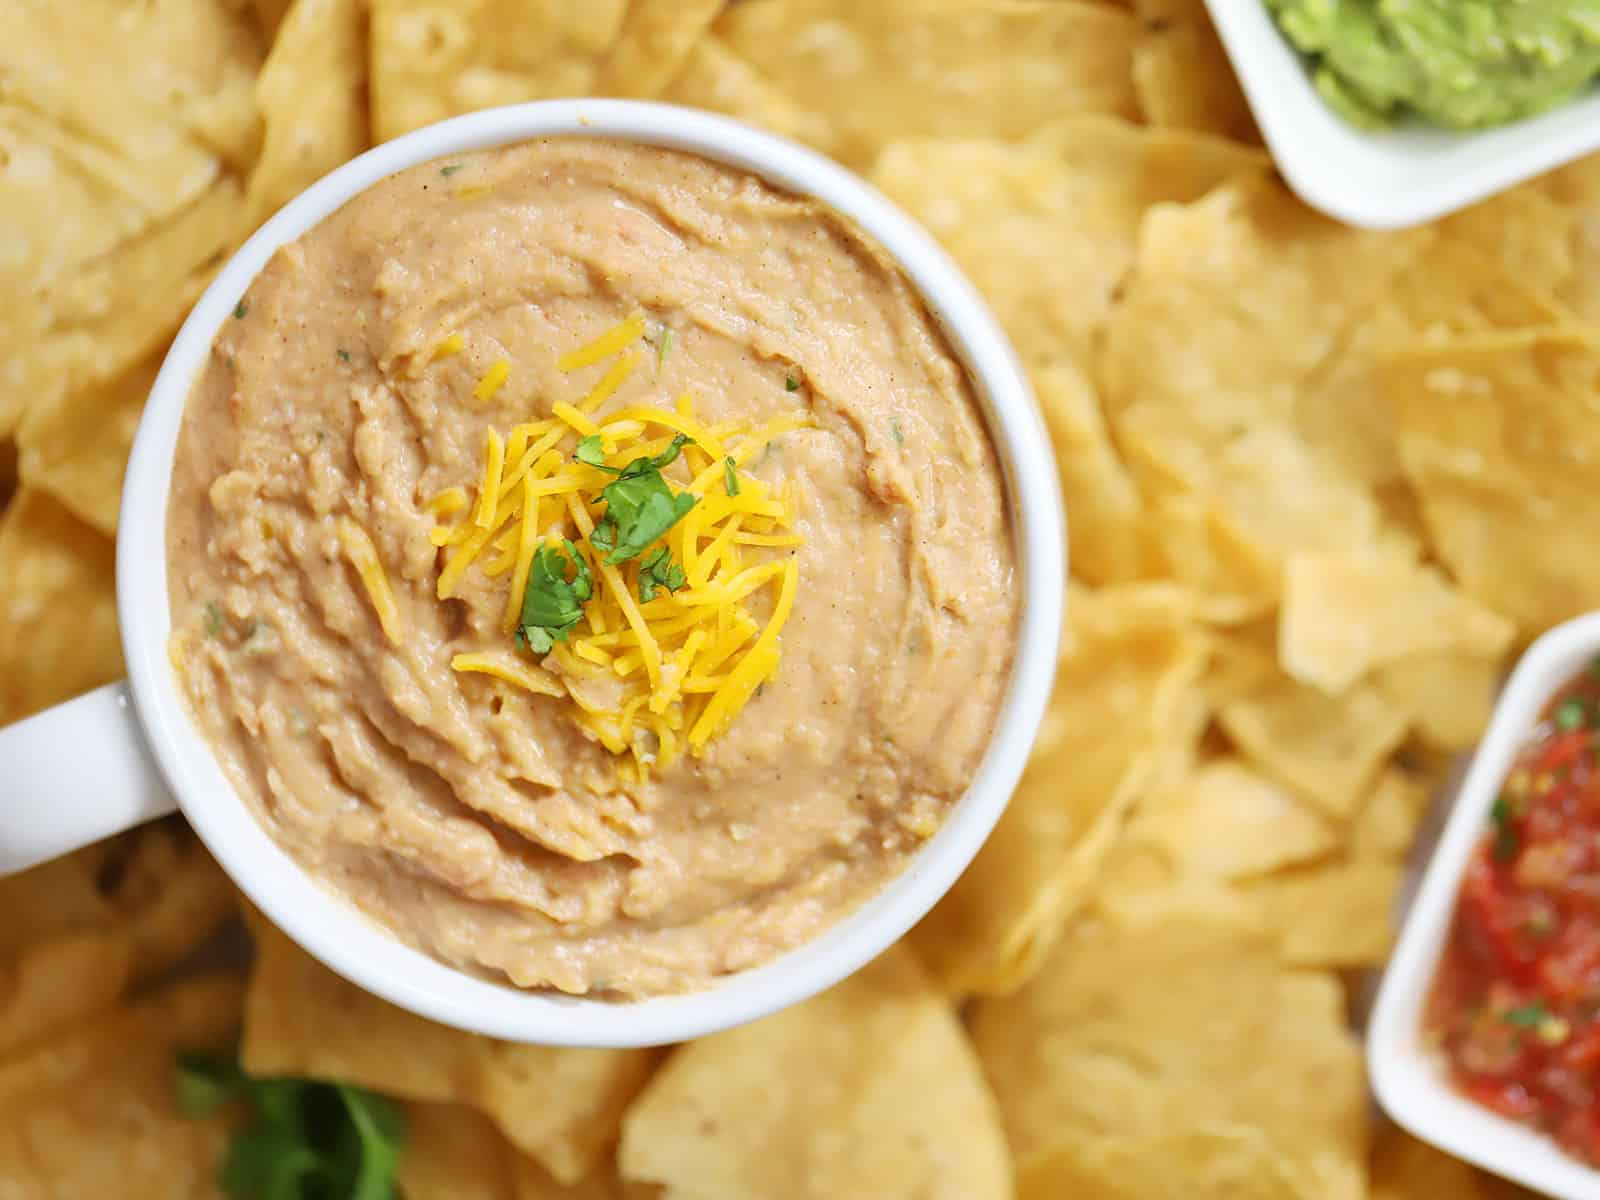 Finished bean dip.